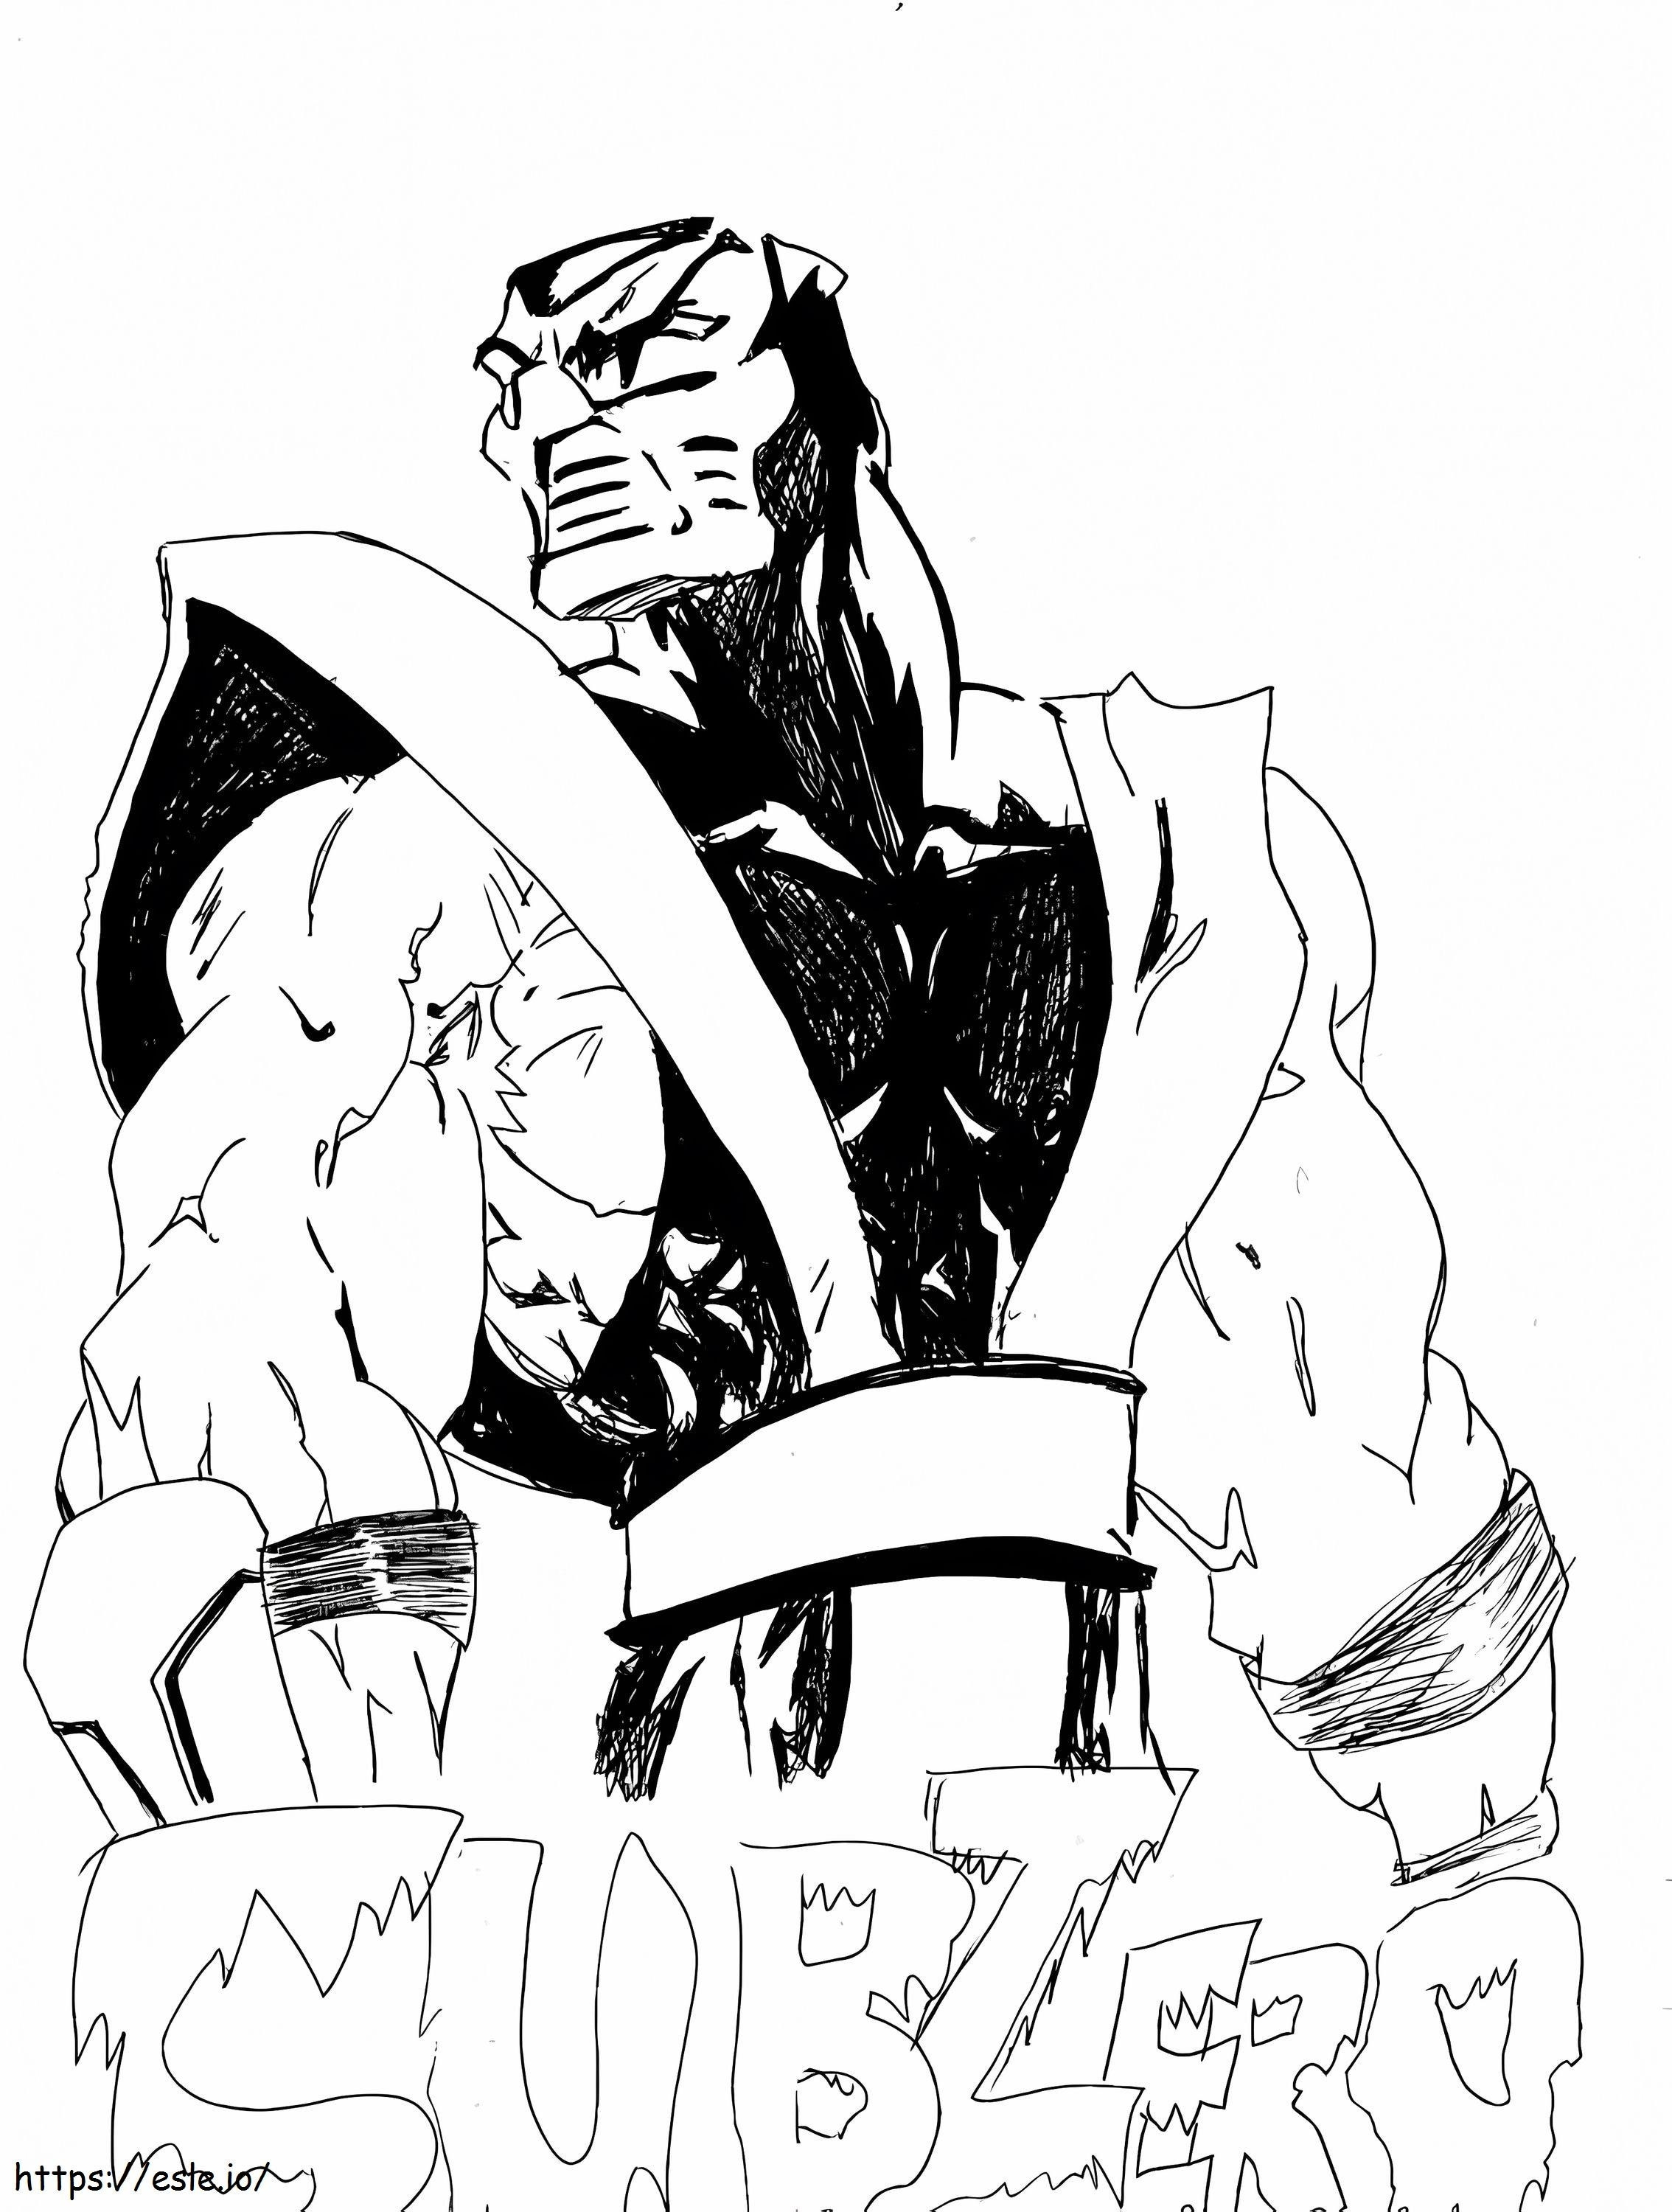 Awesome Sub Zero coloring page